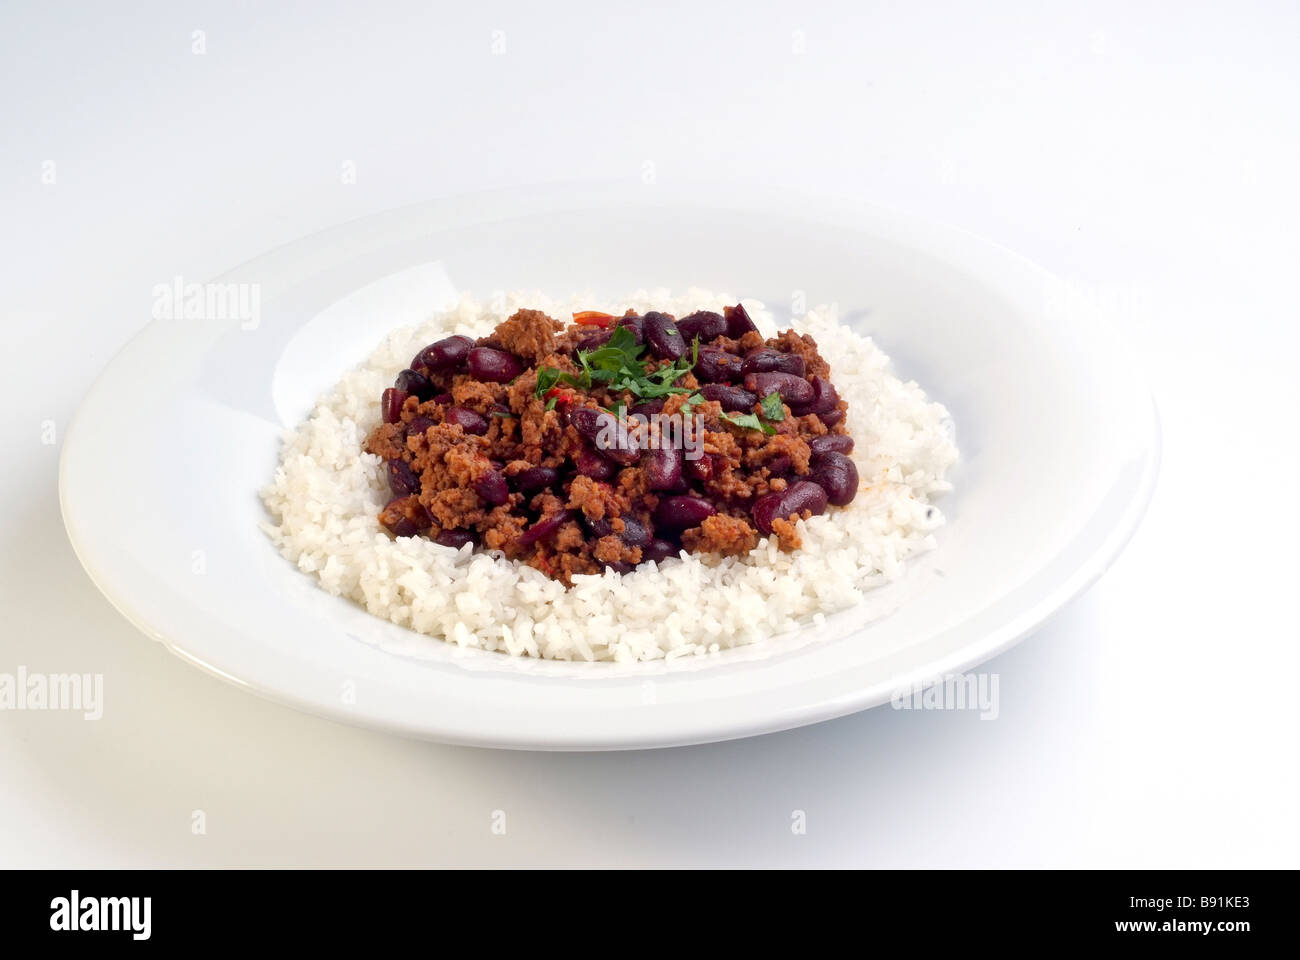 Plate of Chili Con Carne minced meat with beans and white rice Stock Photo